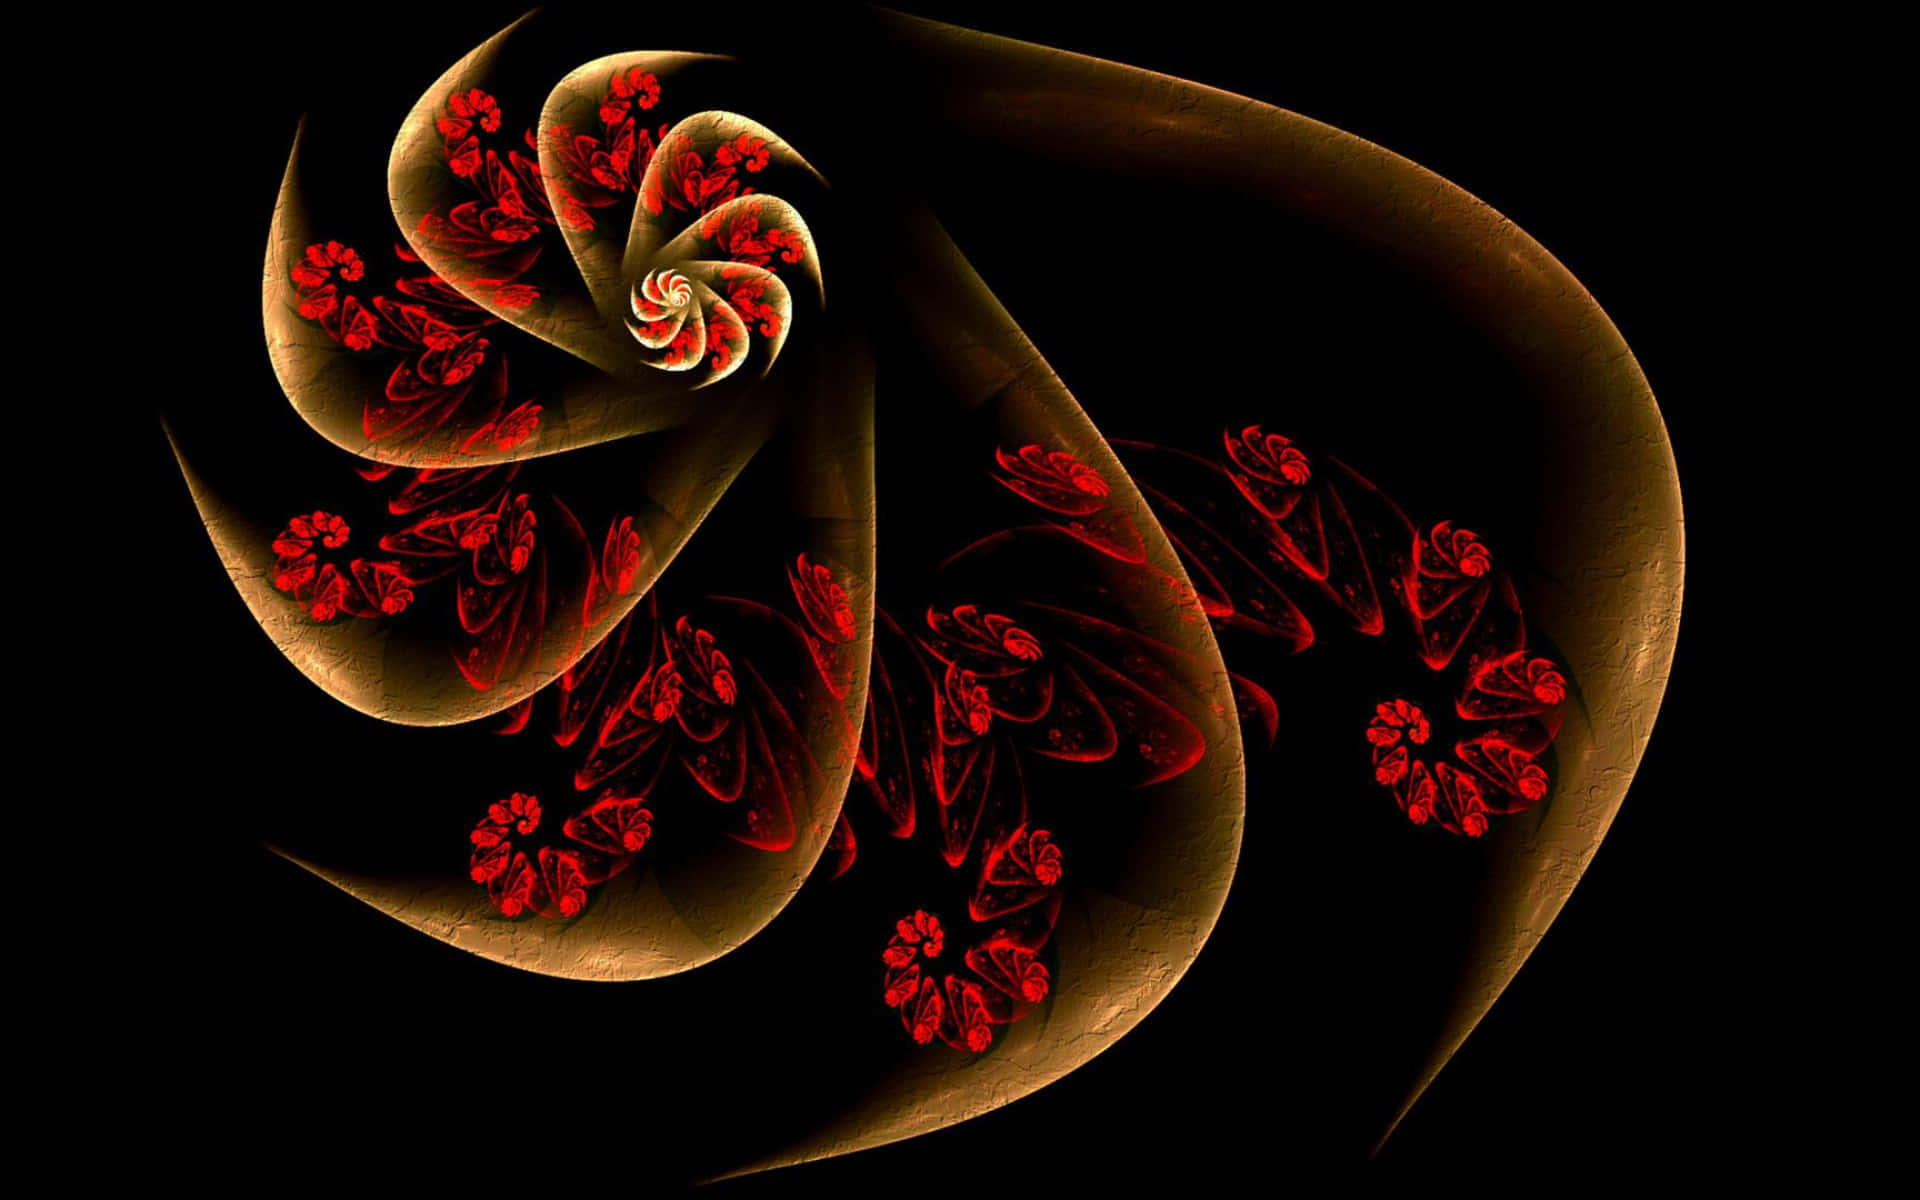 "A beautiful abstract combination of Red and Gold colours" Wallpaper